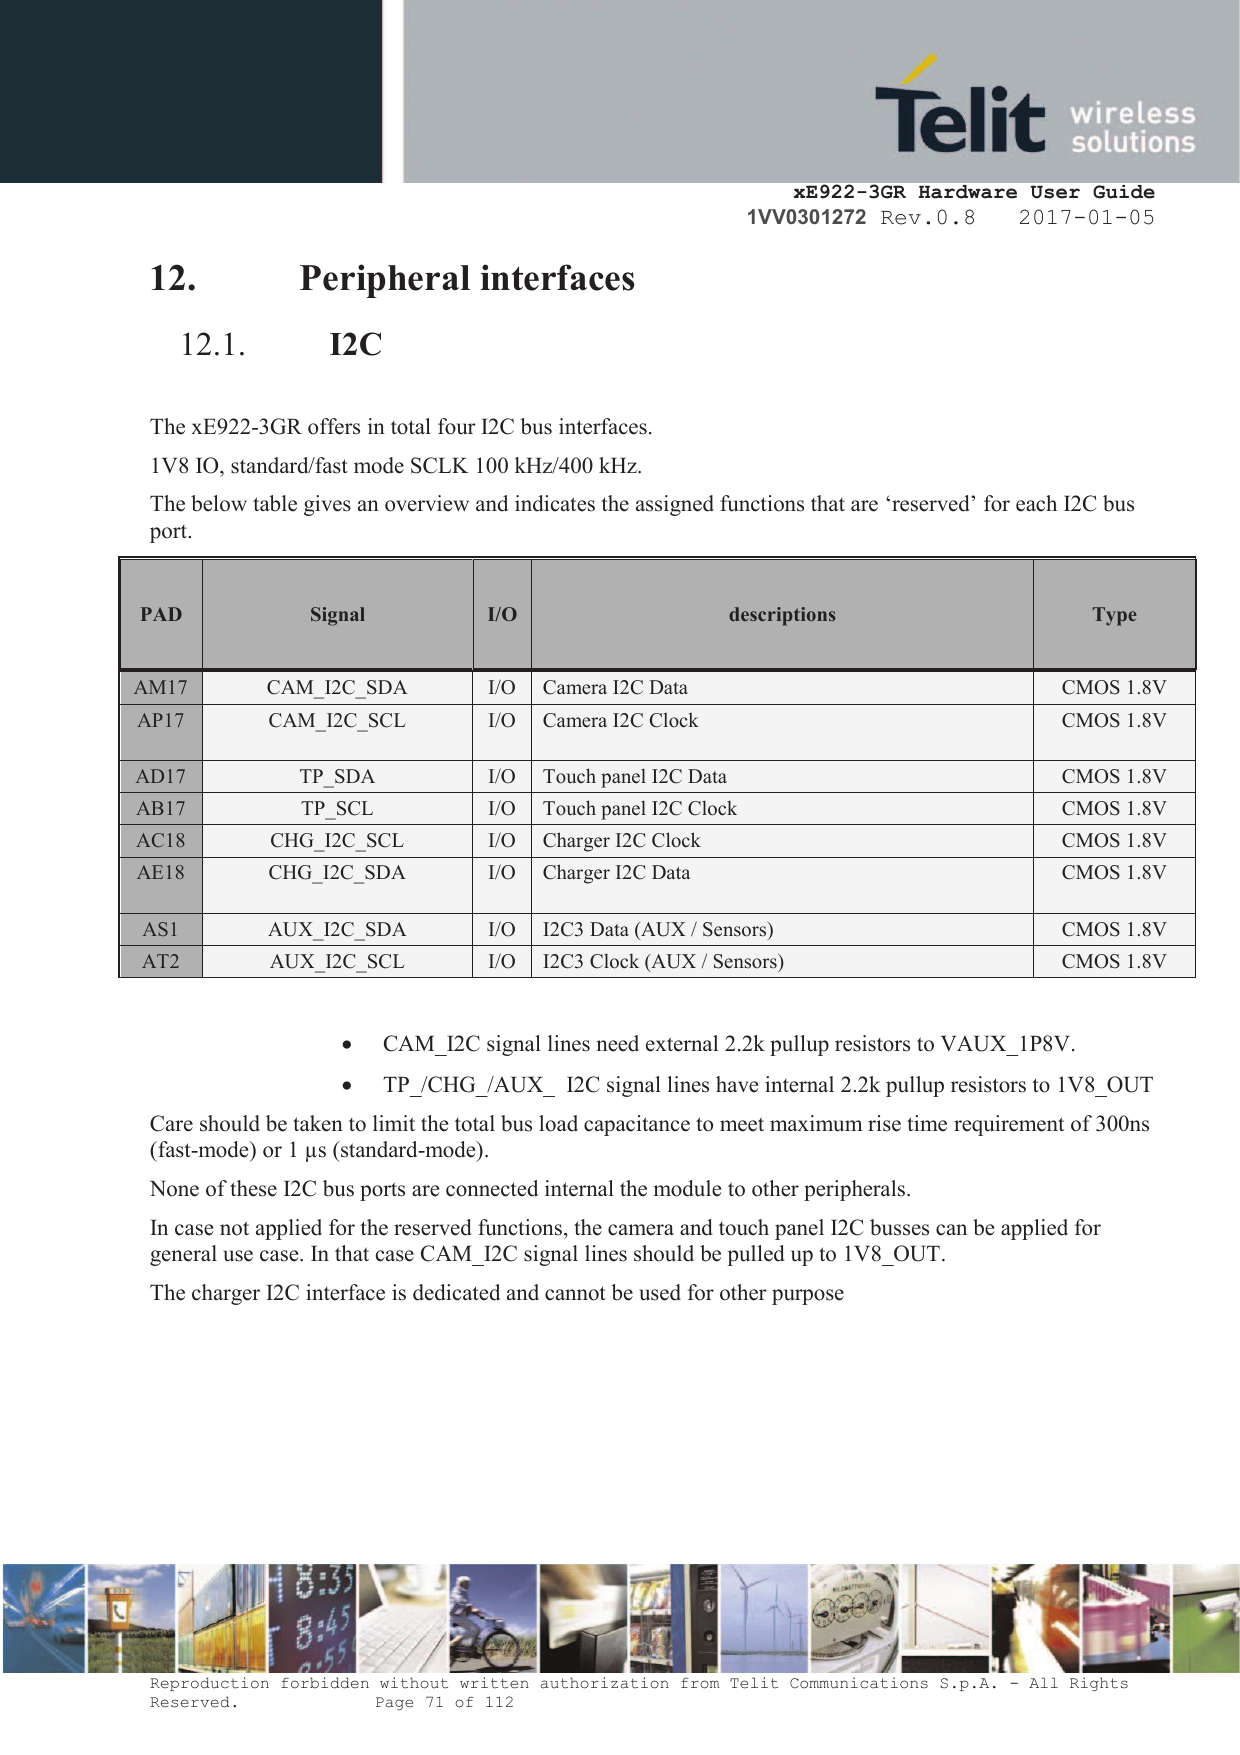     xE922-3GR Hardware User Guide 1VV0301272 Rev.0.8   2017-01-05 Reproduction forbidden without written authorization from Telit Communications S.p.A. - All Rights Reserved.    Page 71 of 112  12. Peripheral interfaces 12.1. I2C  The xE922-3GR offers in total four I2C bus interfaces. 1V8 IO, standard/fast mode SCLK 100 kHz/400 kHz. The below table gives an overview and indicates the assigned functions that are ‘reserved’ for each I2C bus port. PAD Signal I/O descriptions  Type  AM17 CAM_I2C_SDA I/O Camera I2C Data CMOS 1.8V AP17 CAM_I2C_SCL I/O Camera I2C Clock CMOS 1.8V      AD17 TP_SDA I/O Touch panel I2C Data CMOS 1.8V AB17 TP_SCL I/O Touch panel I2C Clock CMOS 1.8V AC18 CHG_I2C_SCL I/O Charger I2C Clock CMOS 1.8V AE18 CHG_I2C_SDA I/O Charger I2C Data CMOS 1.8V      AS1 AUX_I2C_SDA I/O I2C3 Data (AUX / Sensors) CMOS 1.8V AT2 AUX_I2C_SCL I/O I2C3 Clock (AUX / Sensors) CMOS 1.8V  · CAM_I2C signal lines need external 2.2k pullup resistors to VAUX_1P8V. · TP_/CHG_/AUX_  I2C signal lines have internal 2.2k pullup resistors to 1V8_OUT Care should be taken to limit the total bus load capacitance to meet maximum rise time requirement of 300ns (fast-mode) or 1 µs (standard-mode). None of these I2C bus ports are connected internal the module to other peripherals. In case not applied for the reserved functions, the camera and touch panel I2C busses can be applied for general use case. In that case CAM_I2C signal lines should be pulled up to 1V8_OUT. The charger I2C interface is dedicated and cannot be used for other purpose    